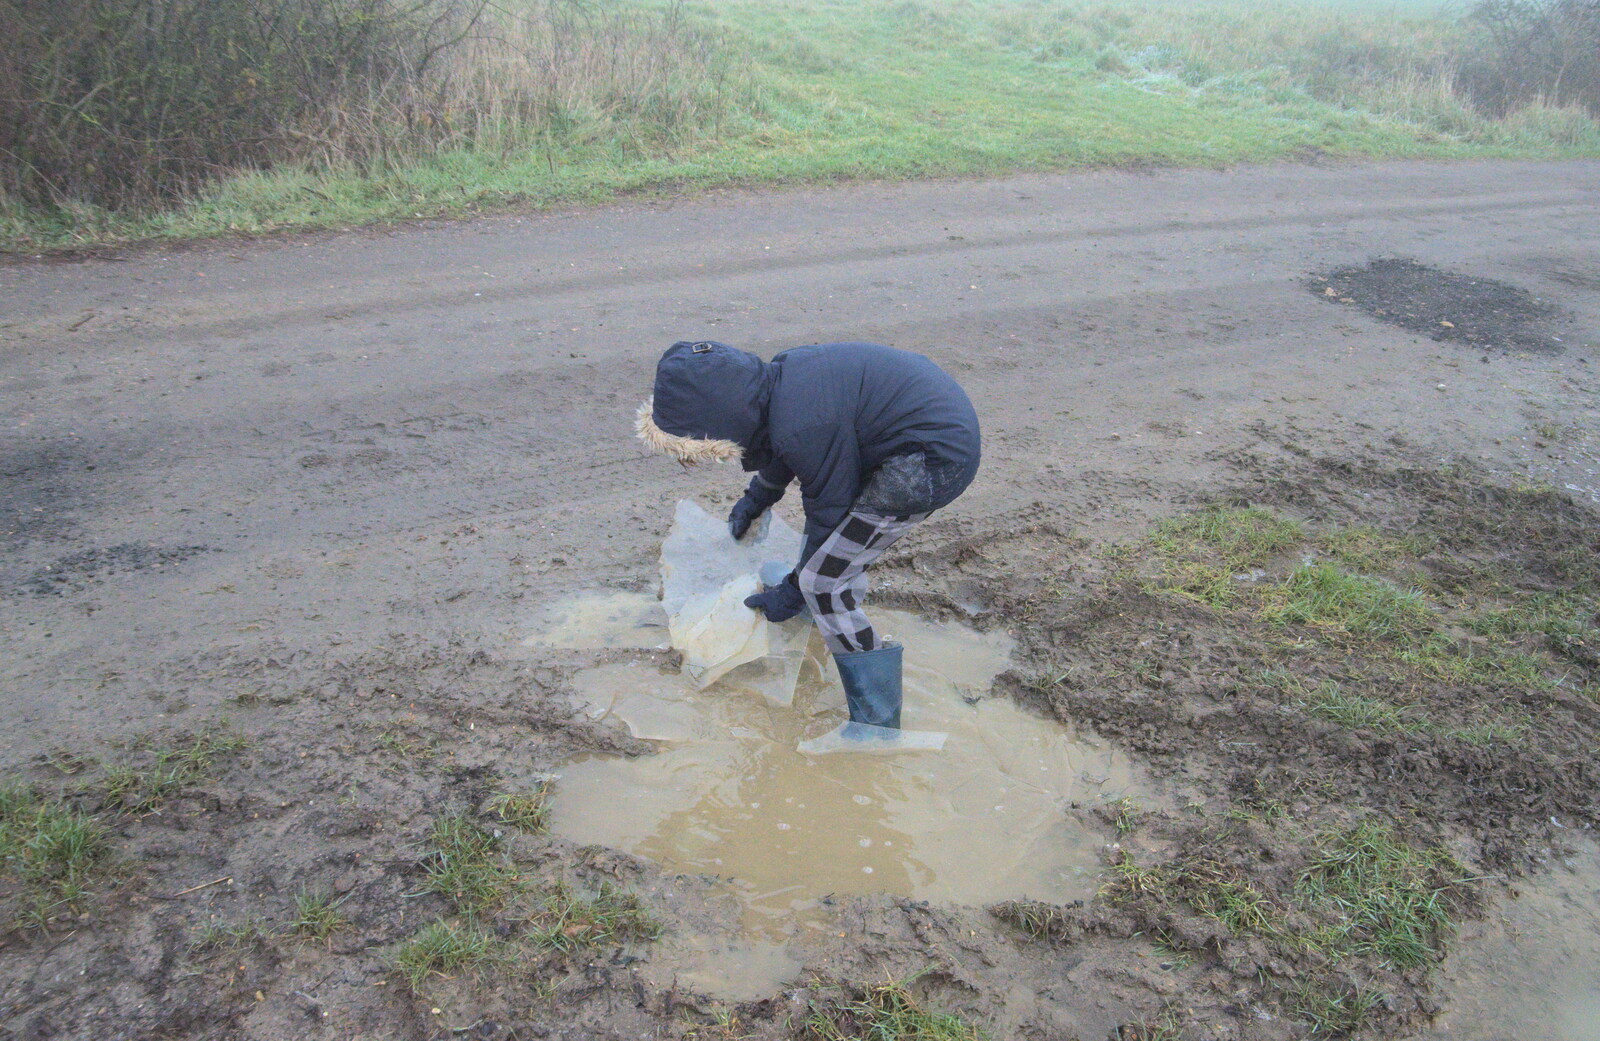 Harry scoops ice out of a puddle from Fun With Ice in Lockdown, Brome, Suffolk - 10th January 2021